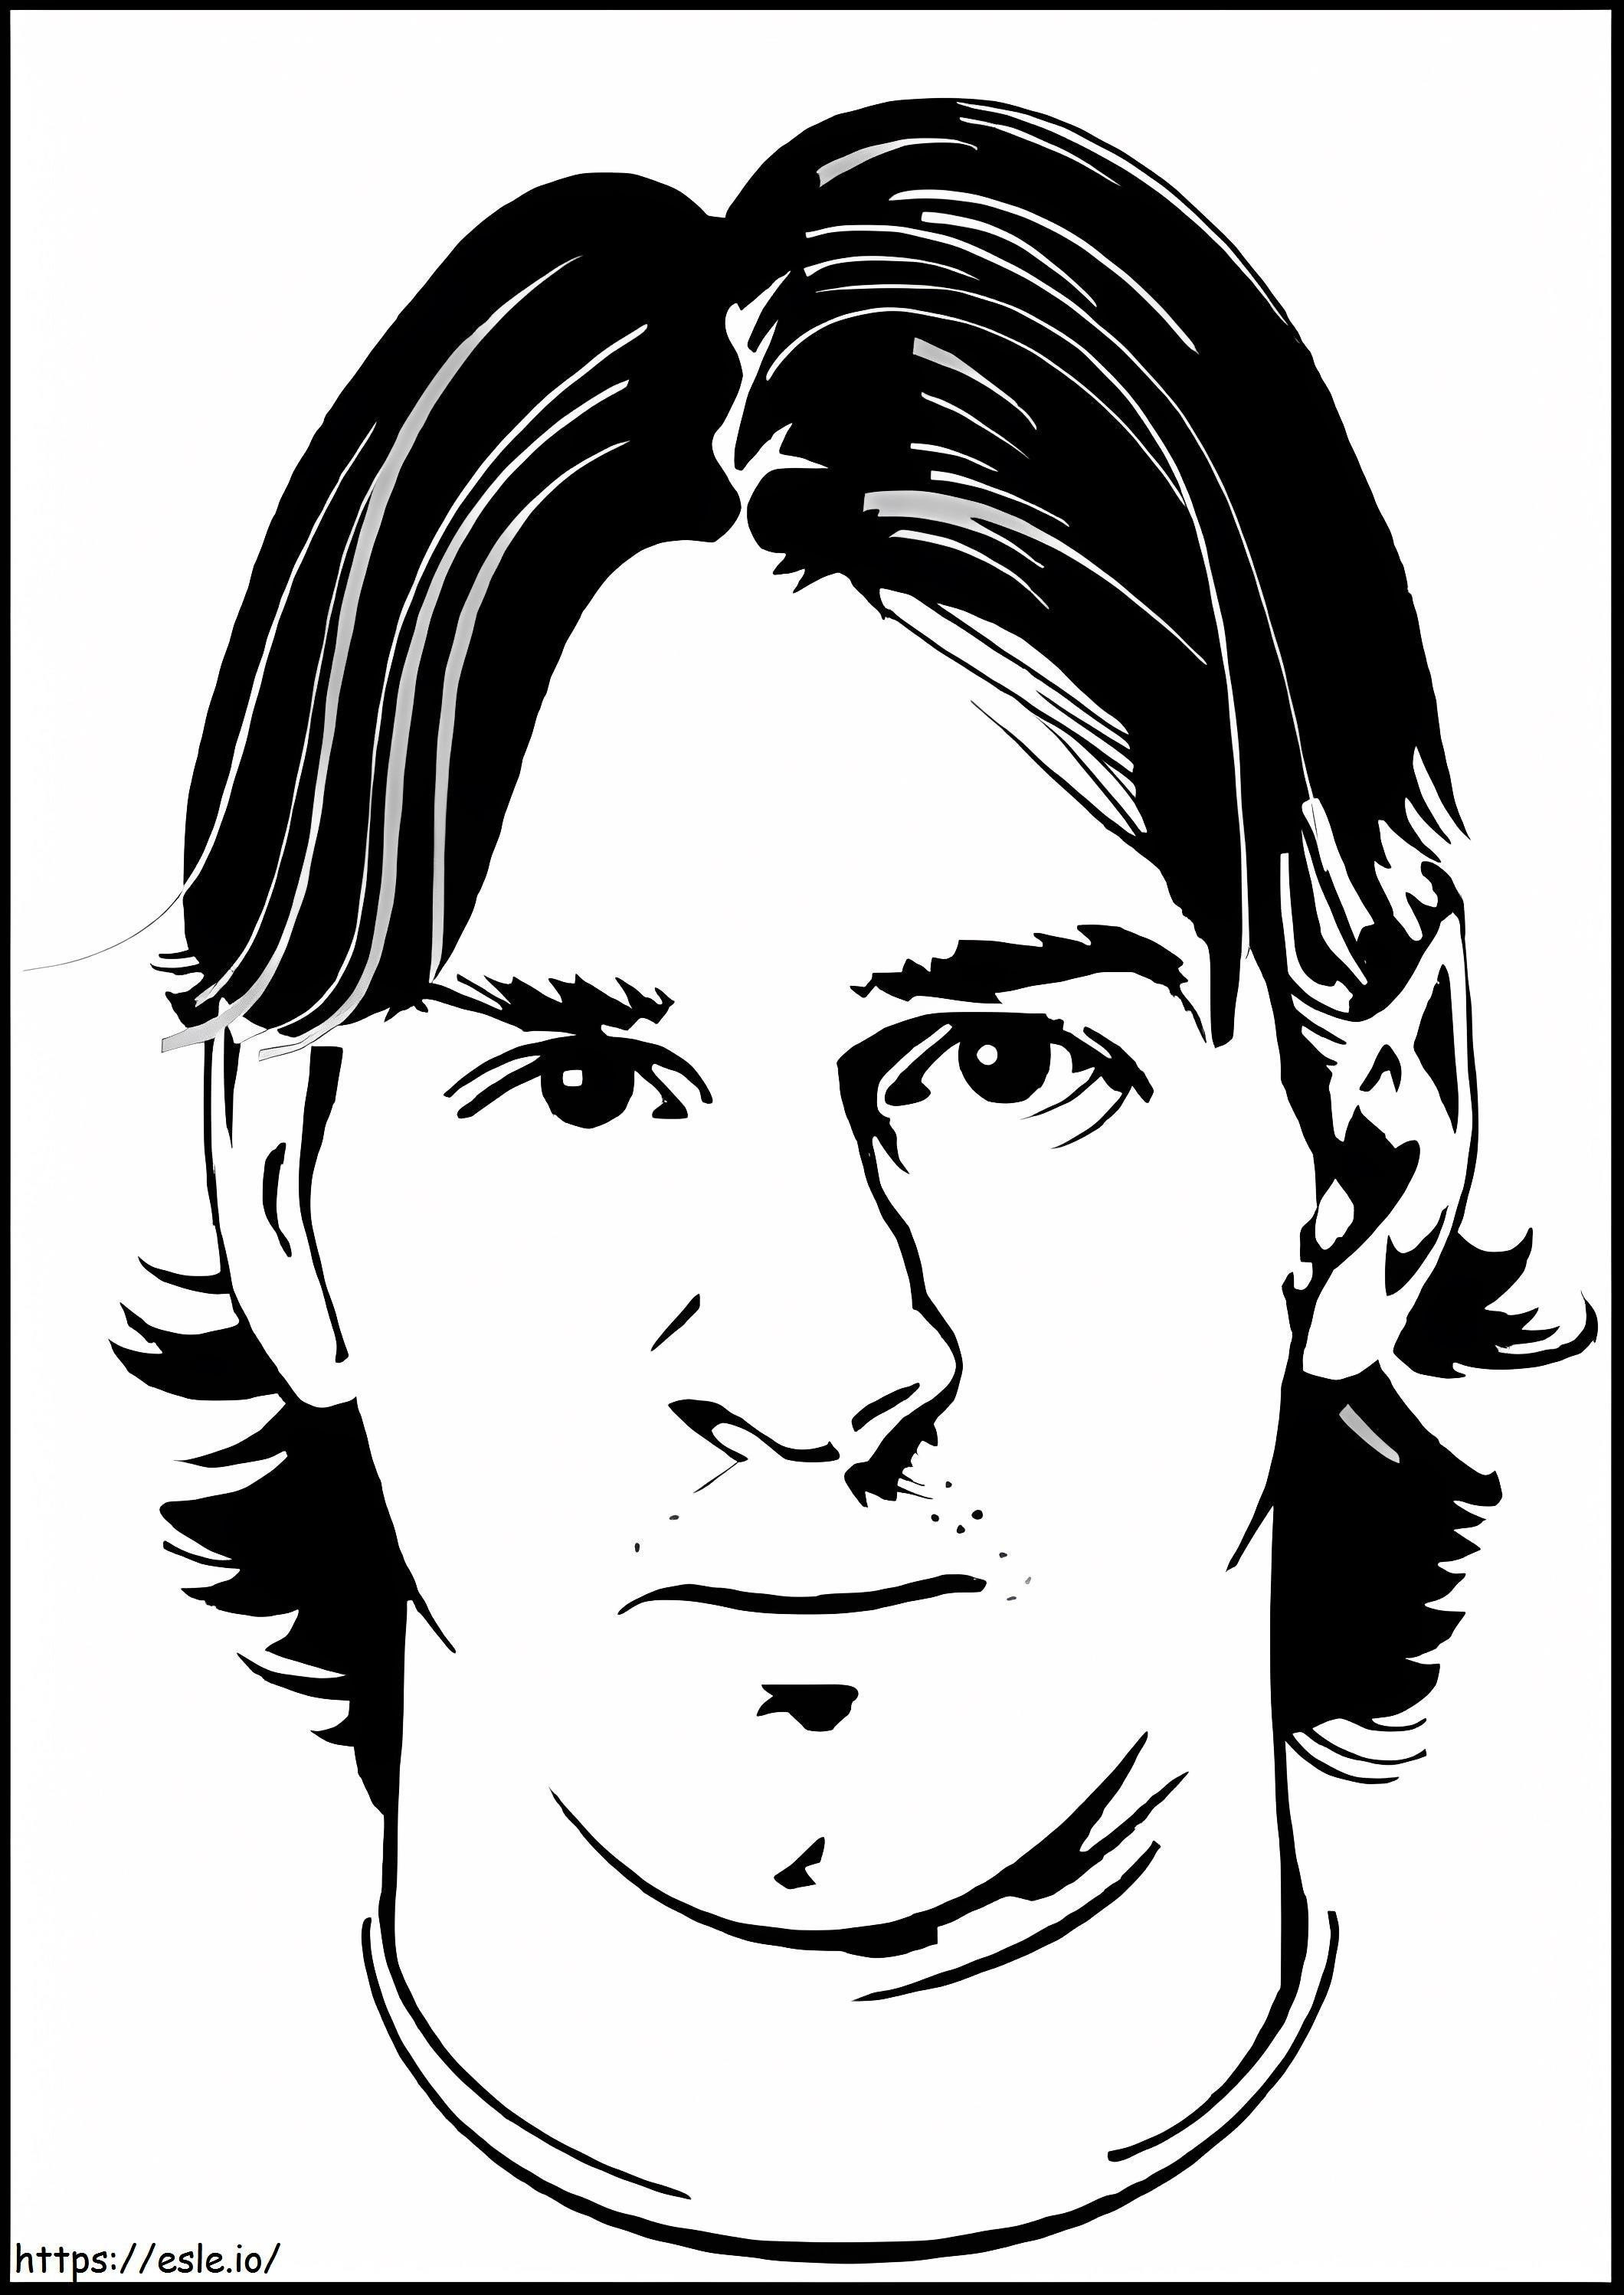 Young Messi coloring page